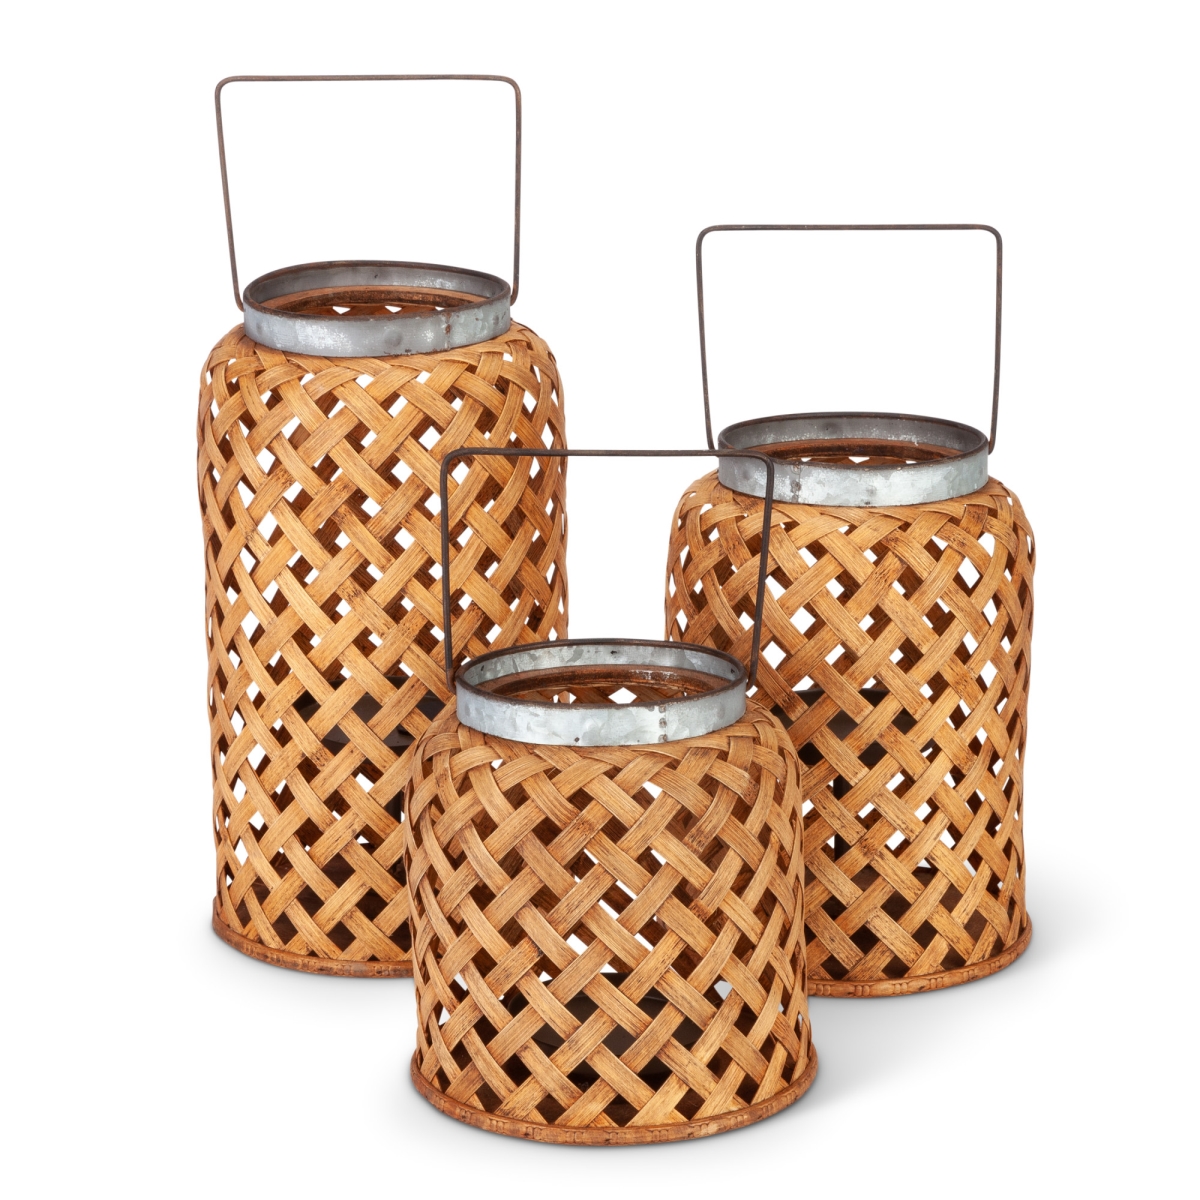 Gerson 94631ec Assorted-size Flameless, Wooden Tobacco Basket Hurricanes - Brown - Set Of 3